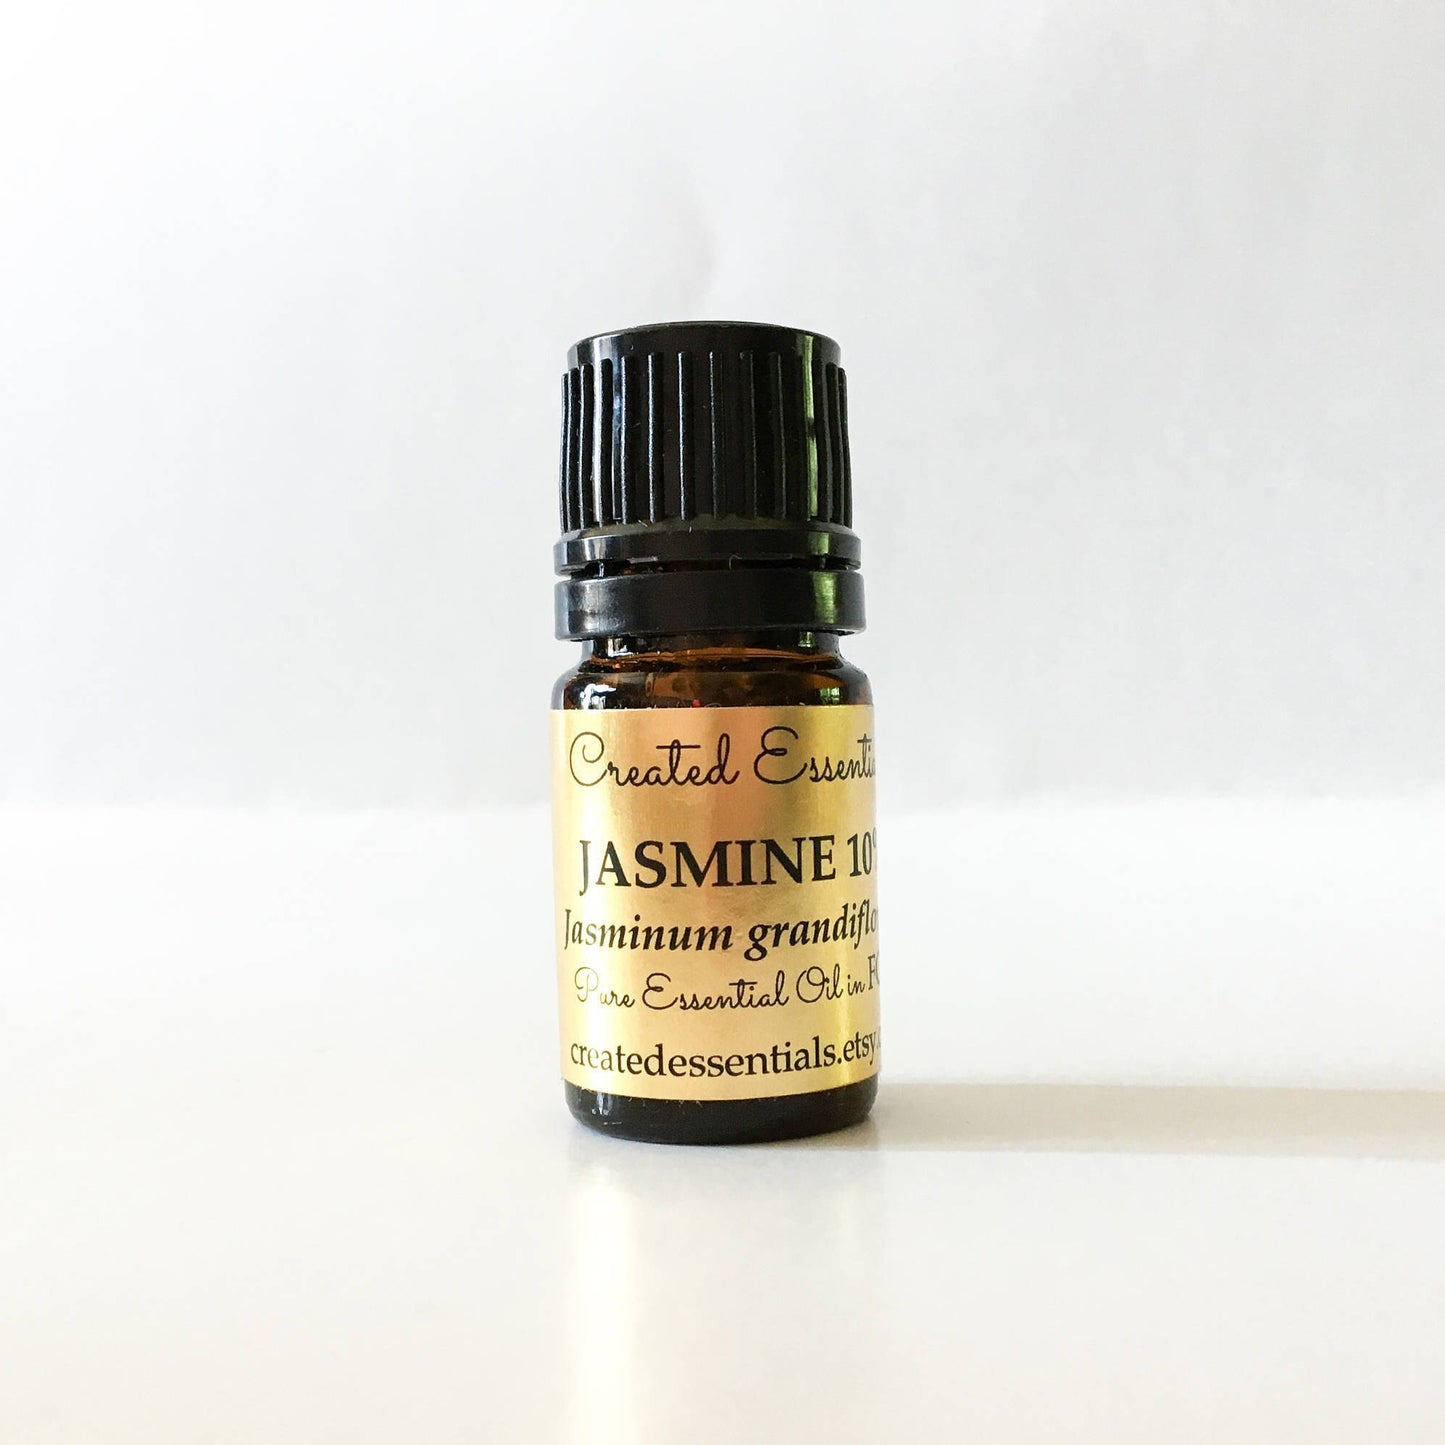 Jasmine Absolute 10% | Pure Jasmine Absolute blended with Fractionated Coconut Oil | Pure Therapeutic Jasmine Essential Oil | Aromatherapy